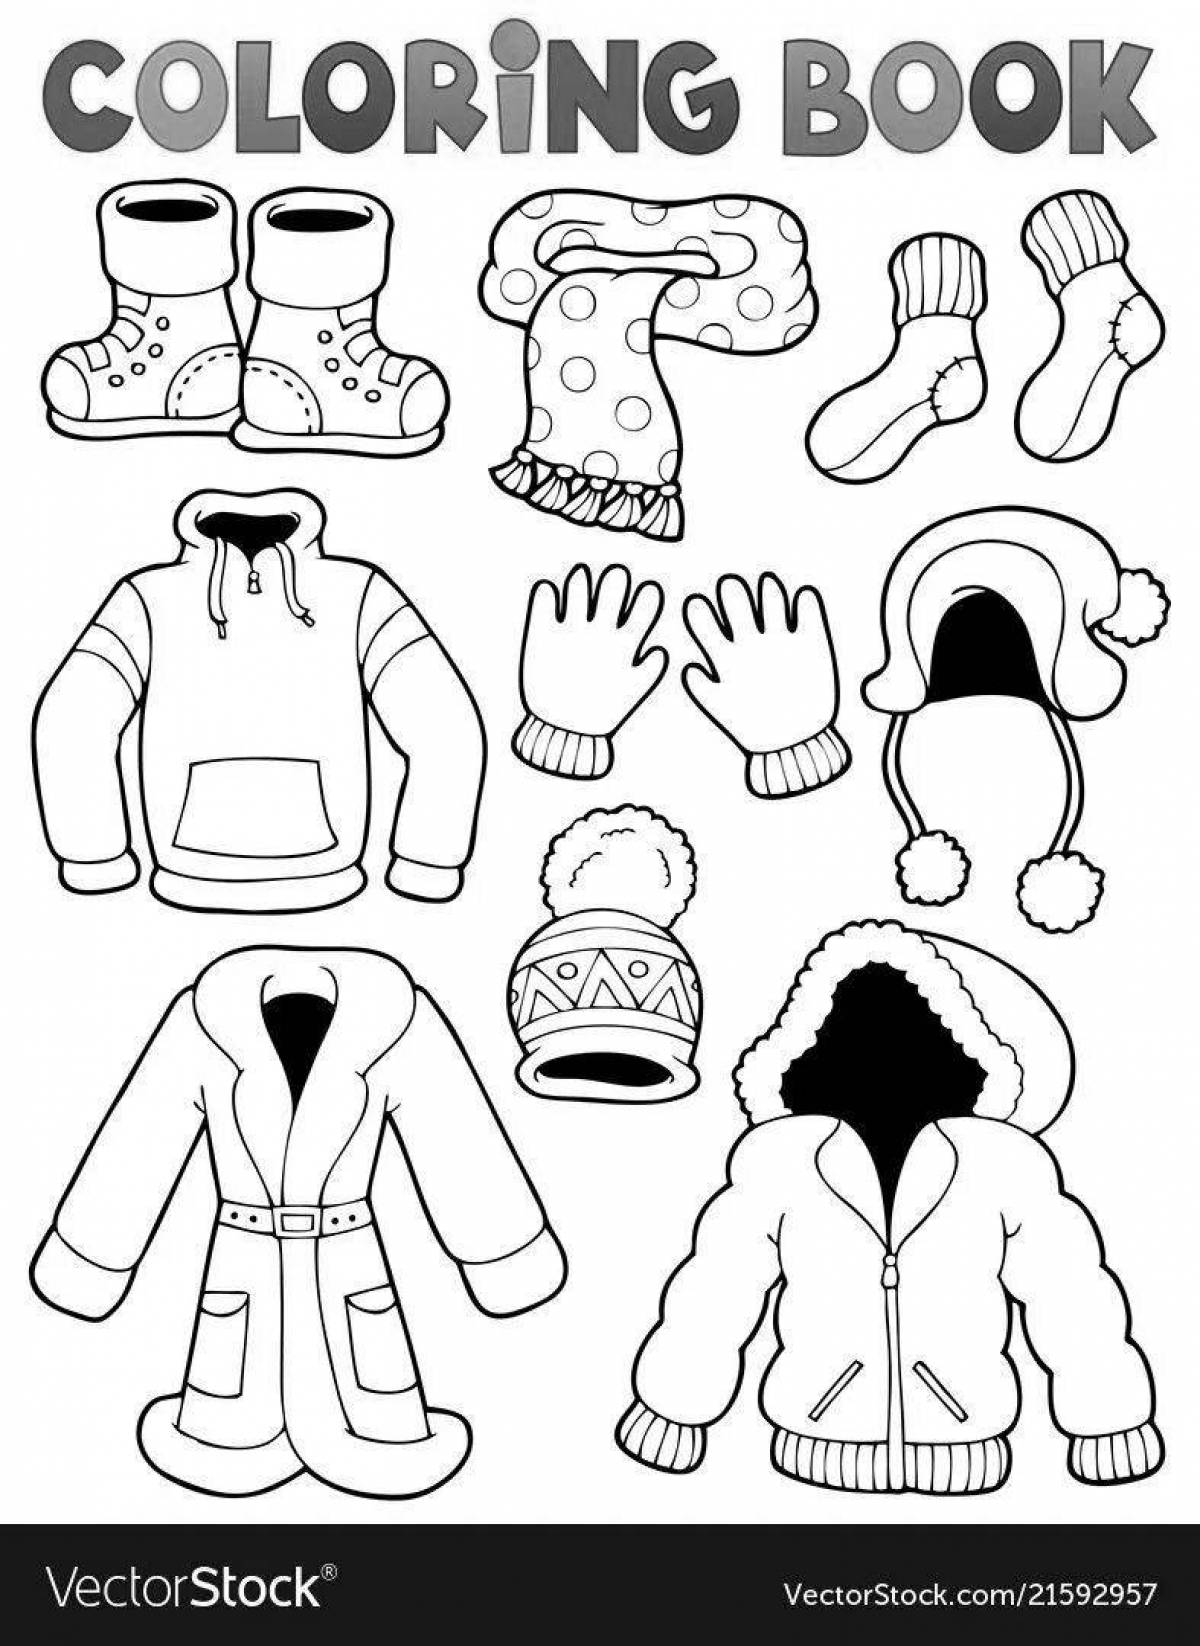 Coloring book adorable winter clothes for children 6-7 years old